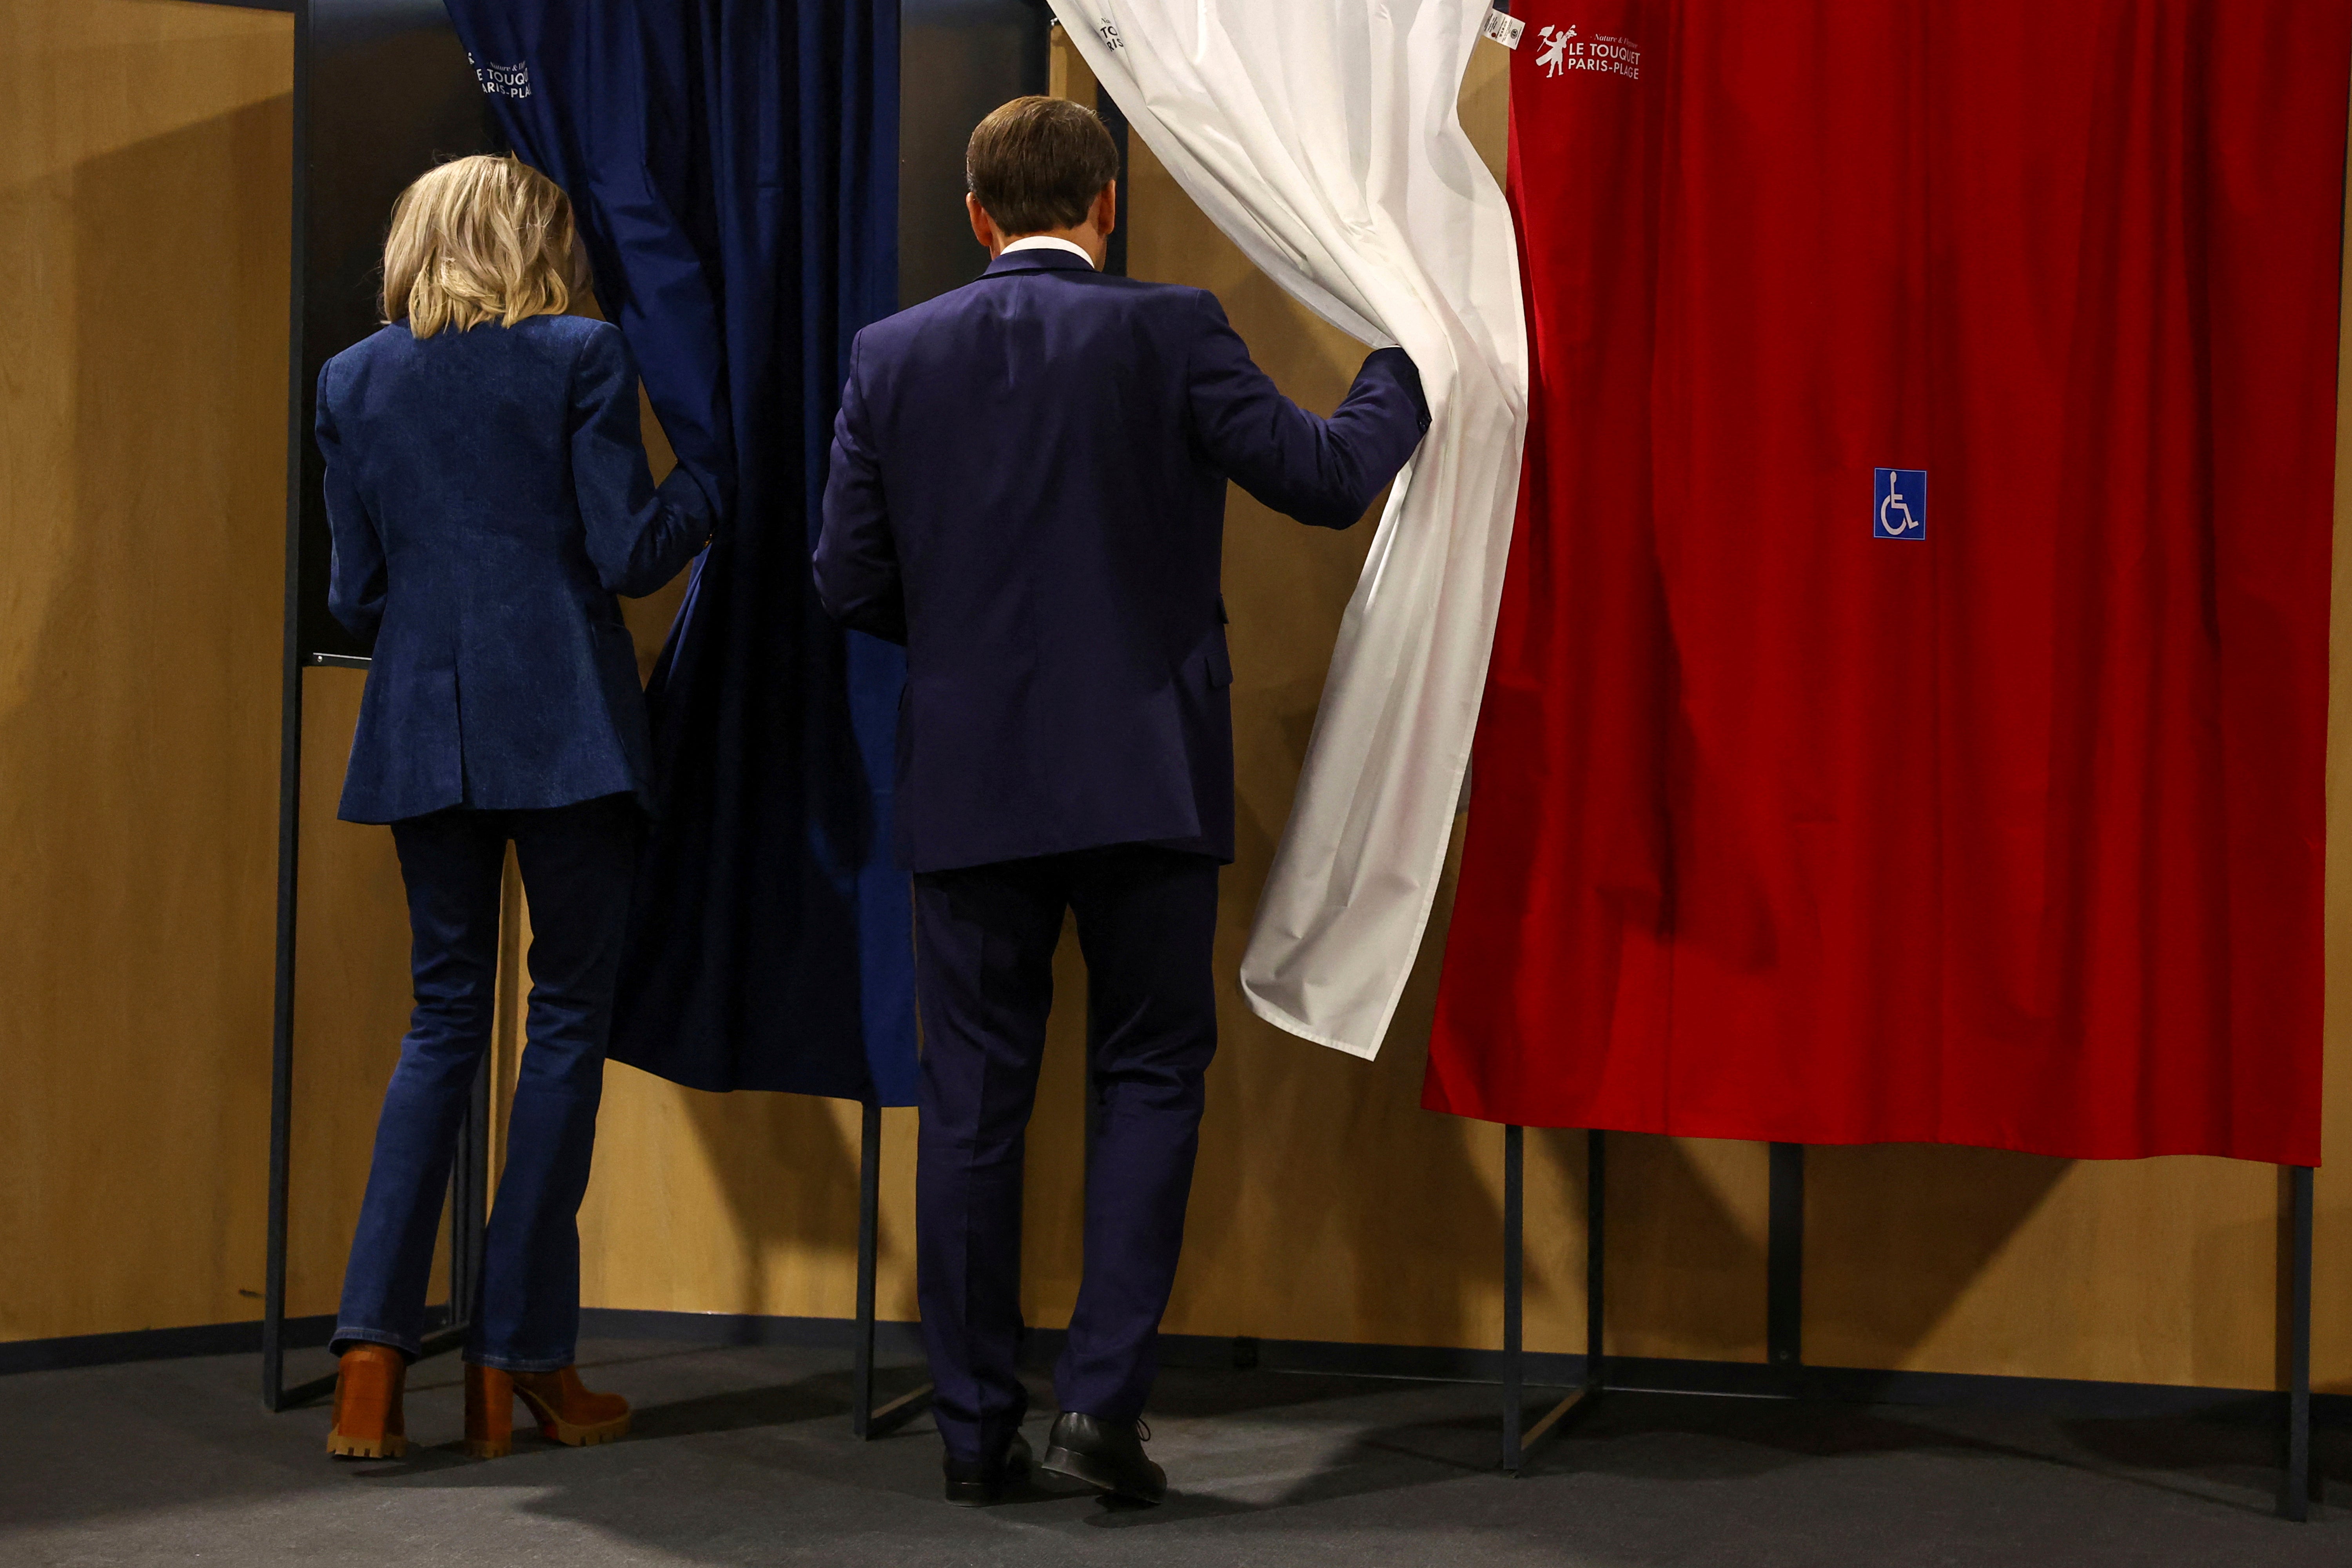 French President Emmanuel Macron and his wife Brigitte Macron enter a voting booth during the European elections on Sunday